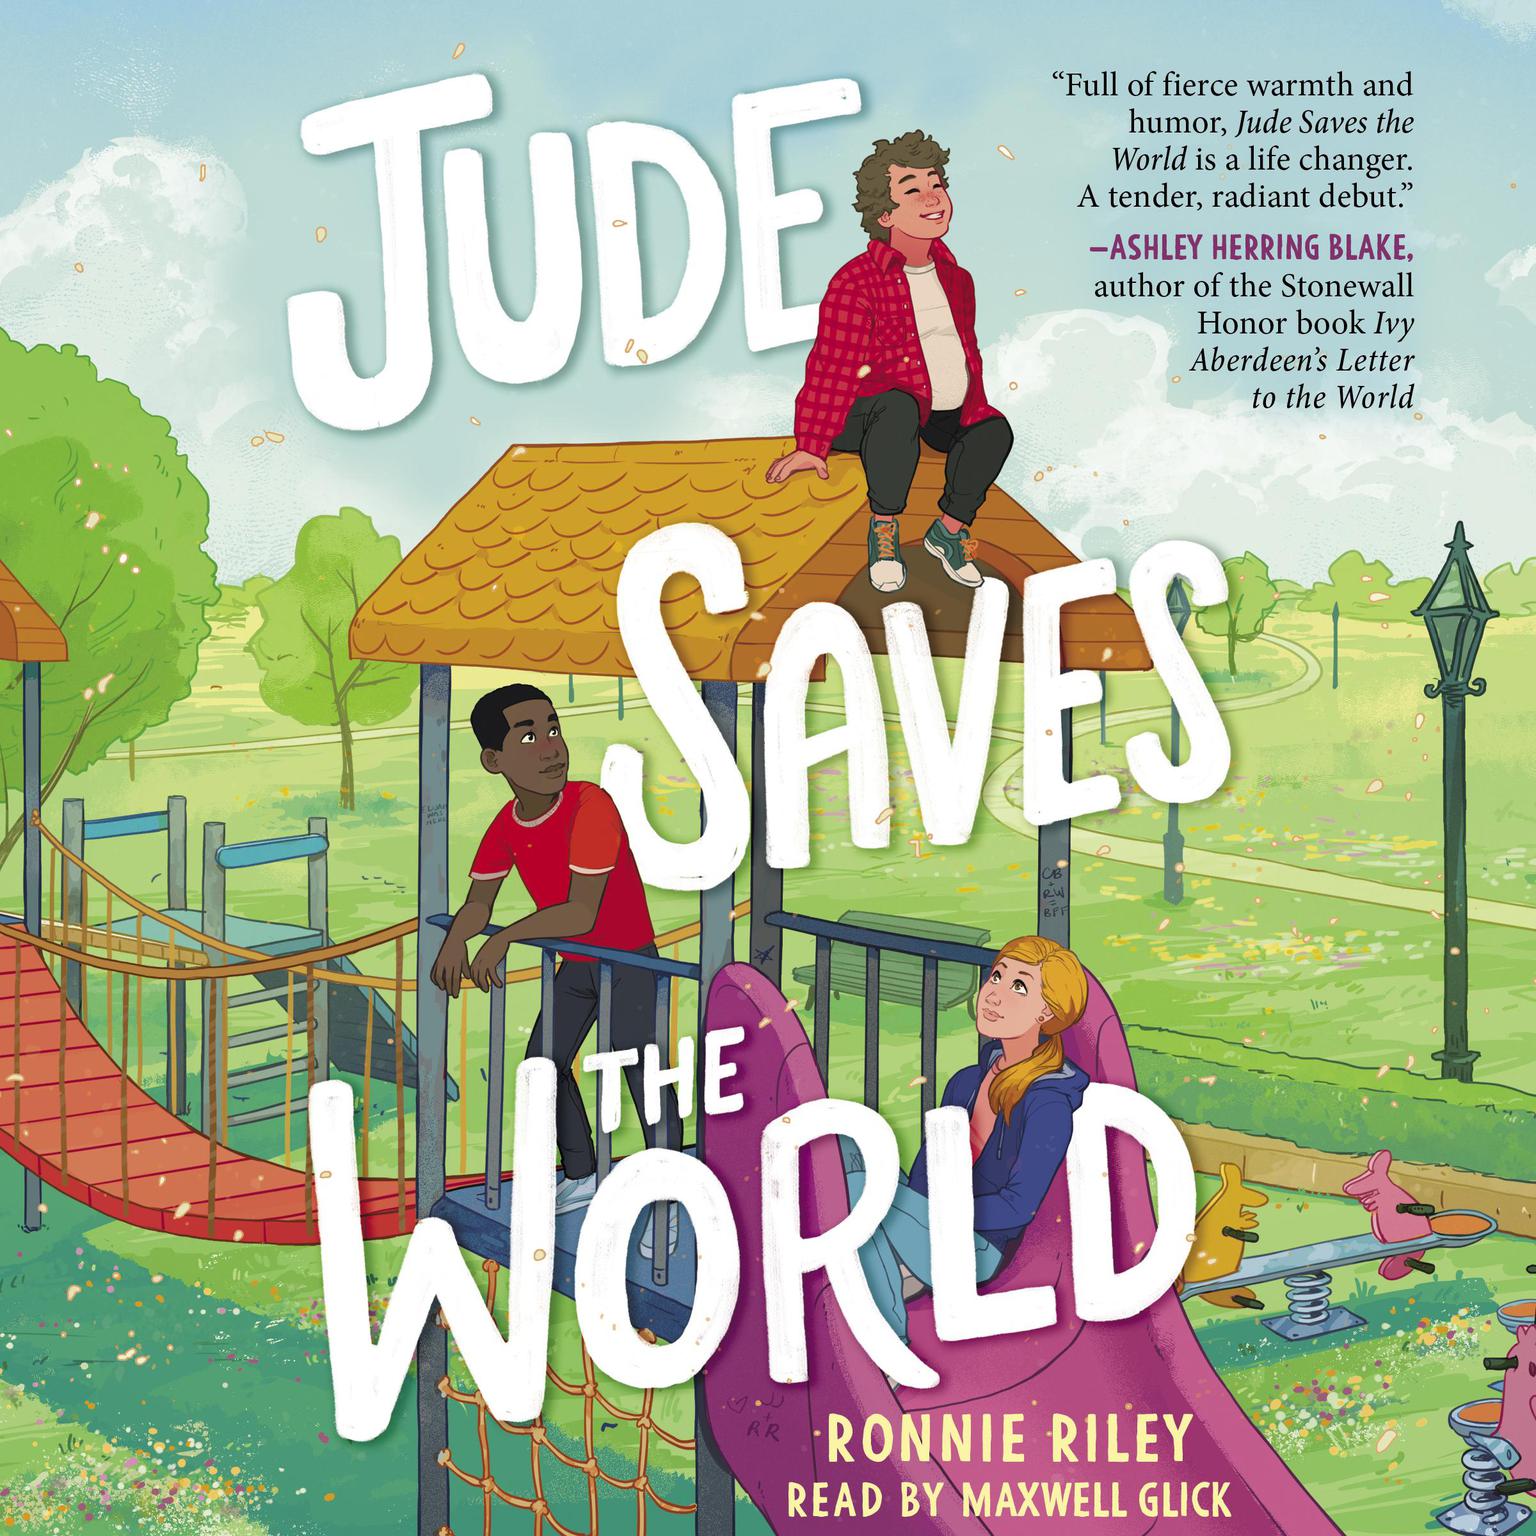 Jude Saves the World Audiobook, by Ronnie Riley